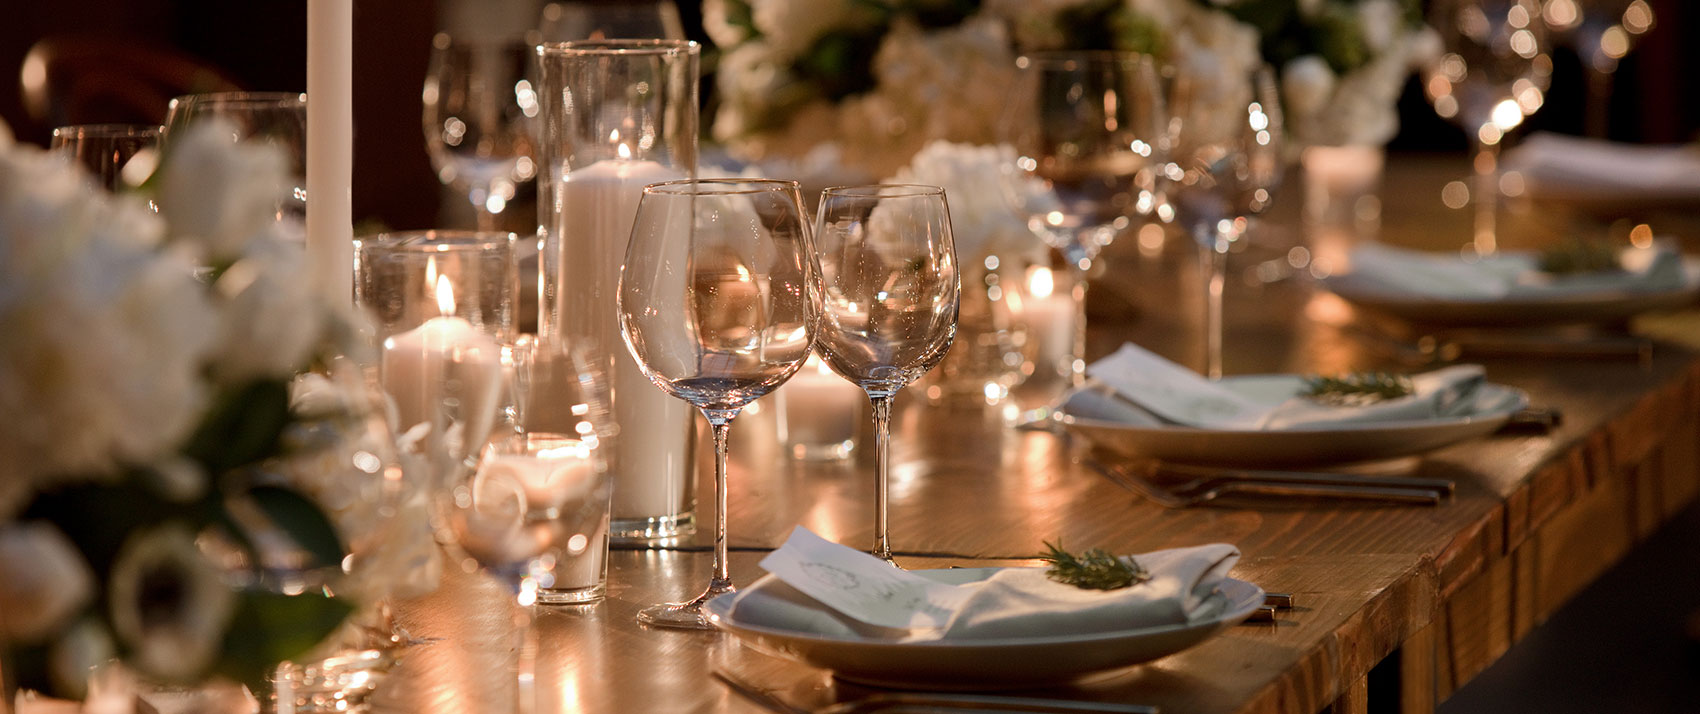 wedding reception table set with flowers and candles